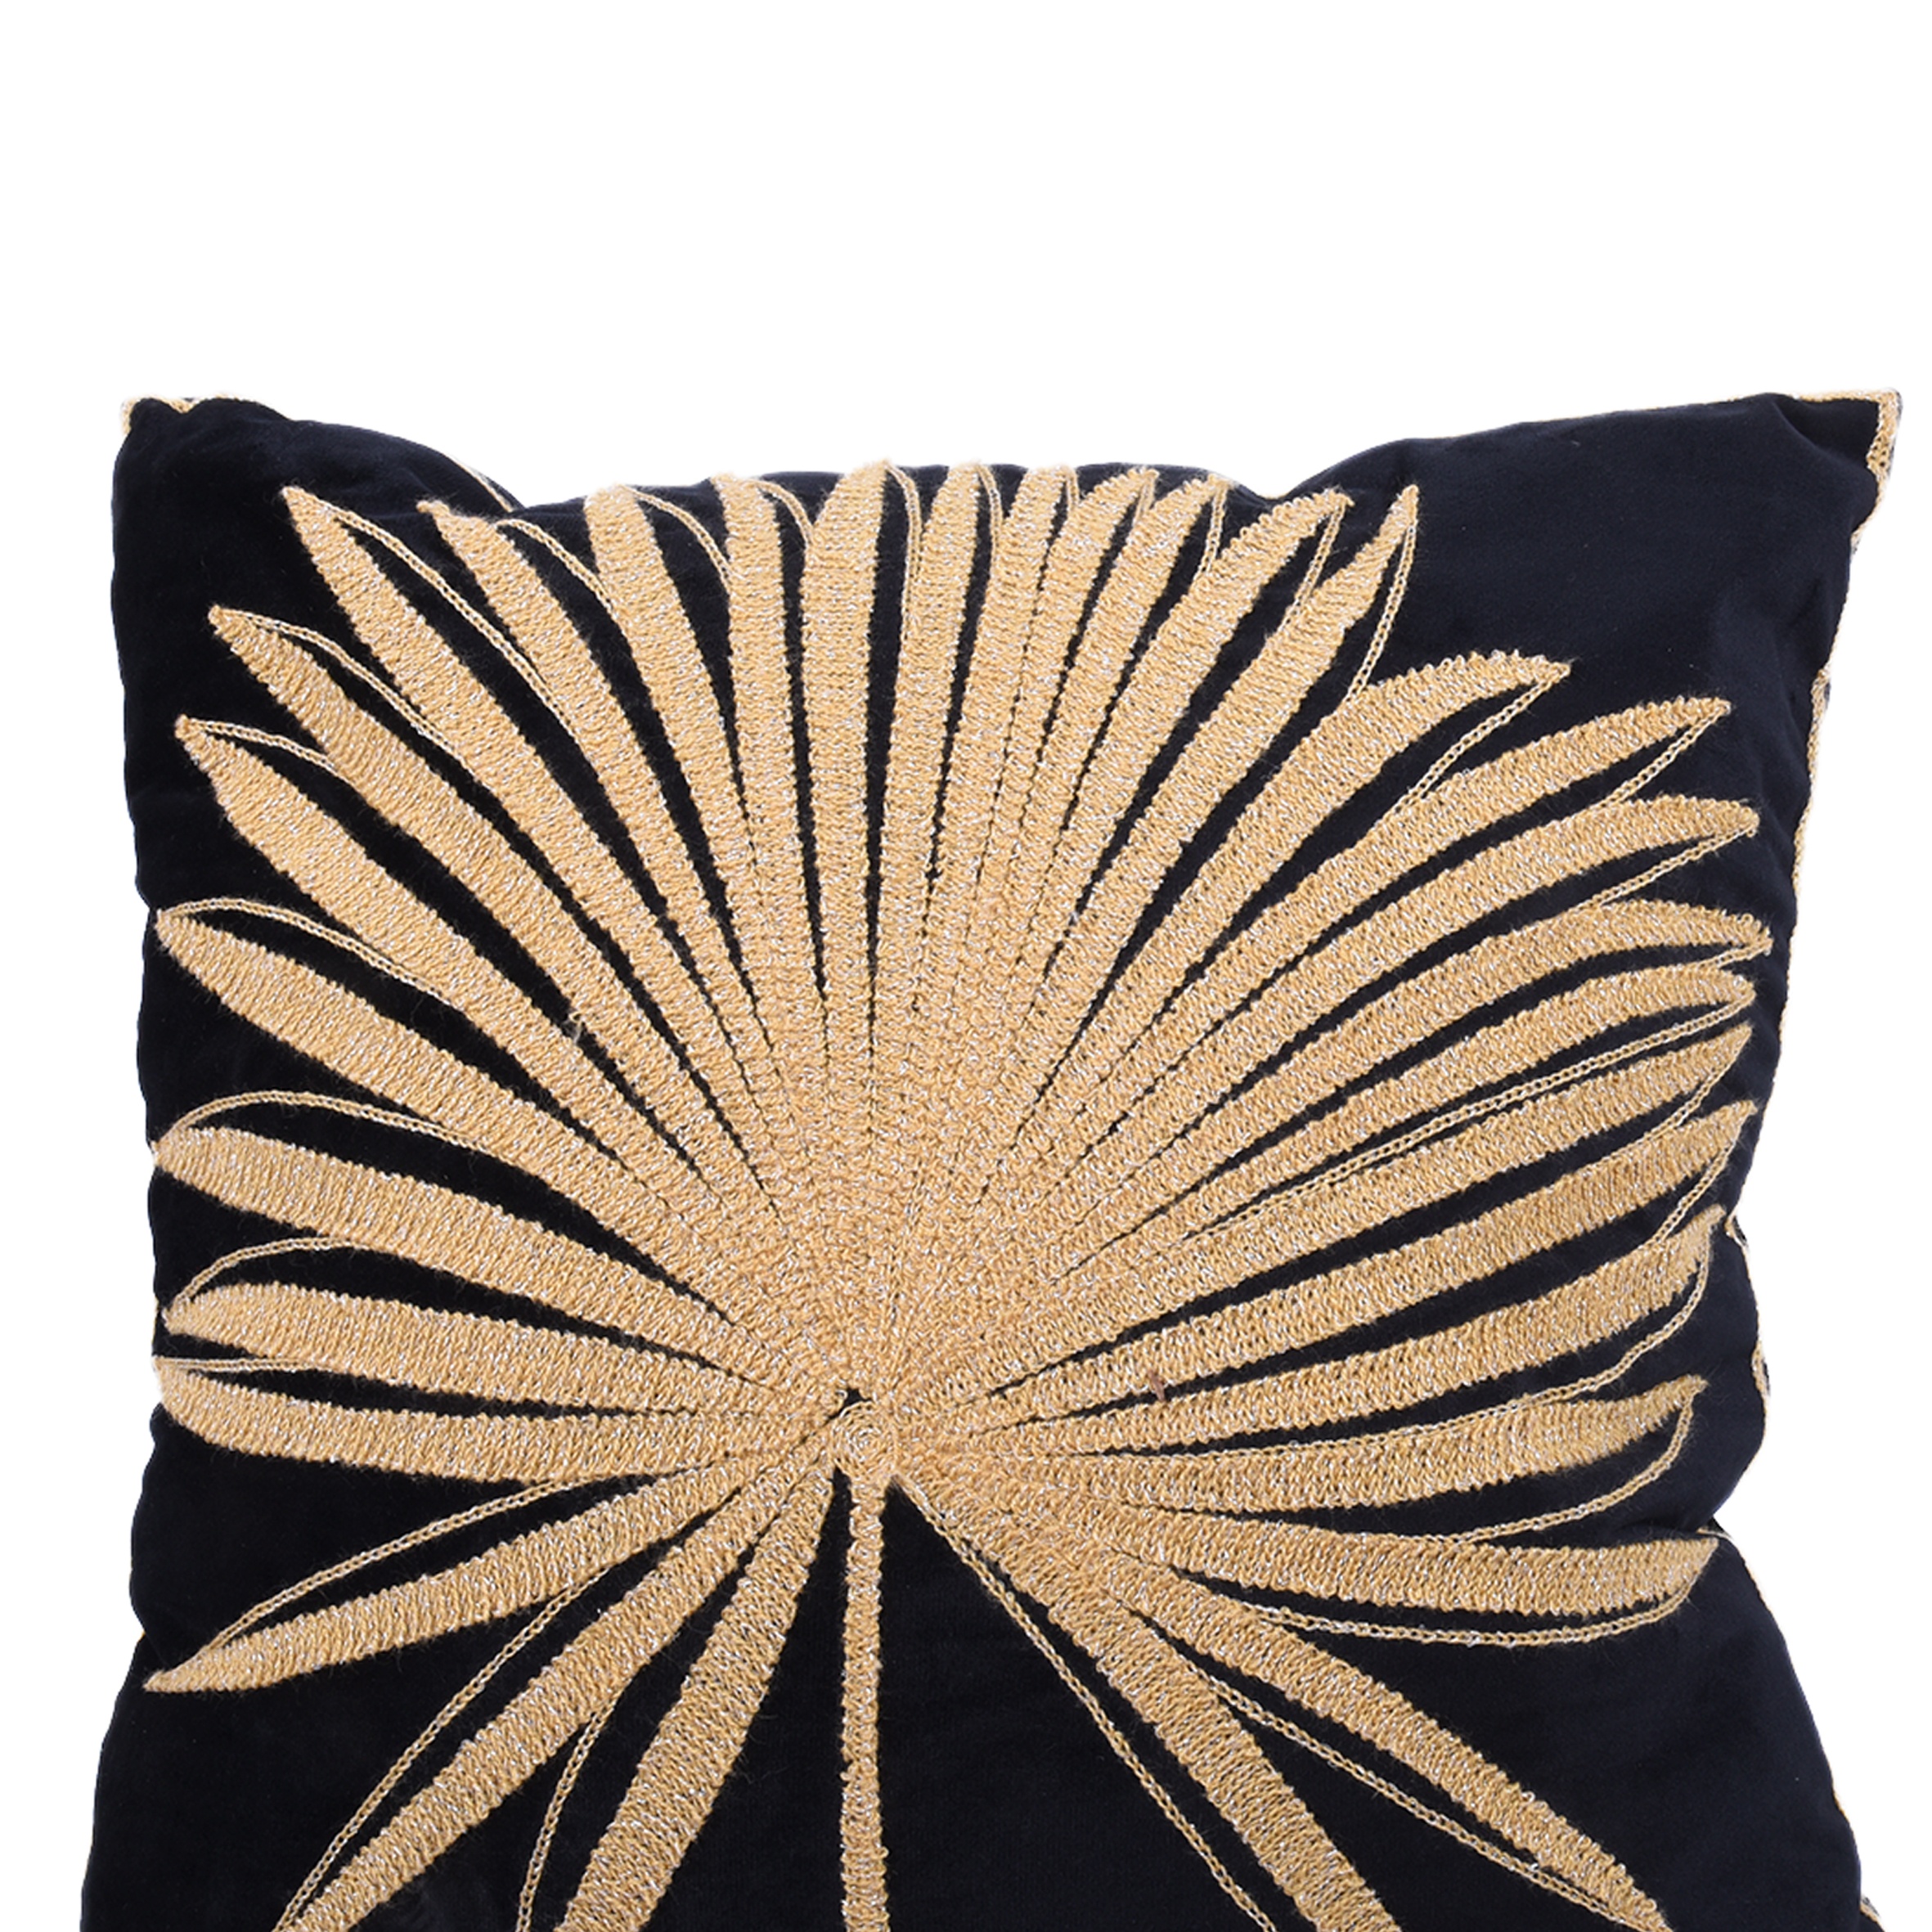 comfort cushion black gold series pillows for home decor